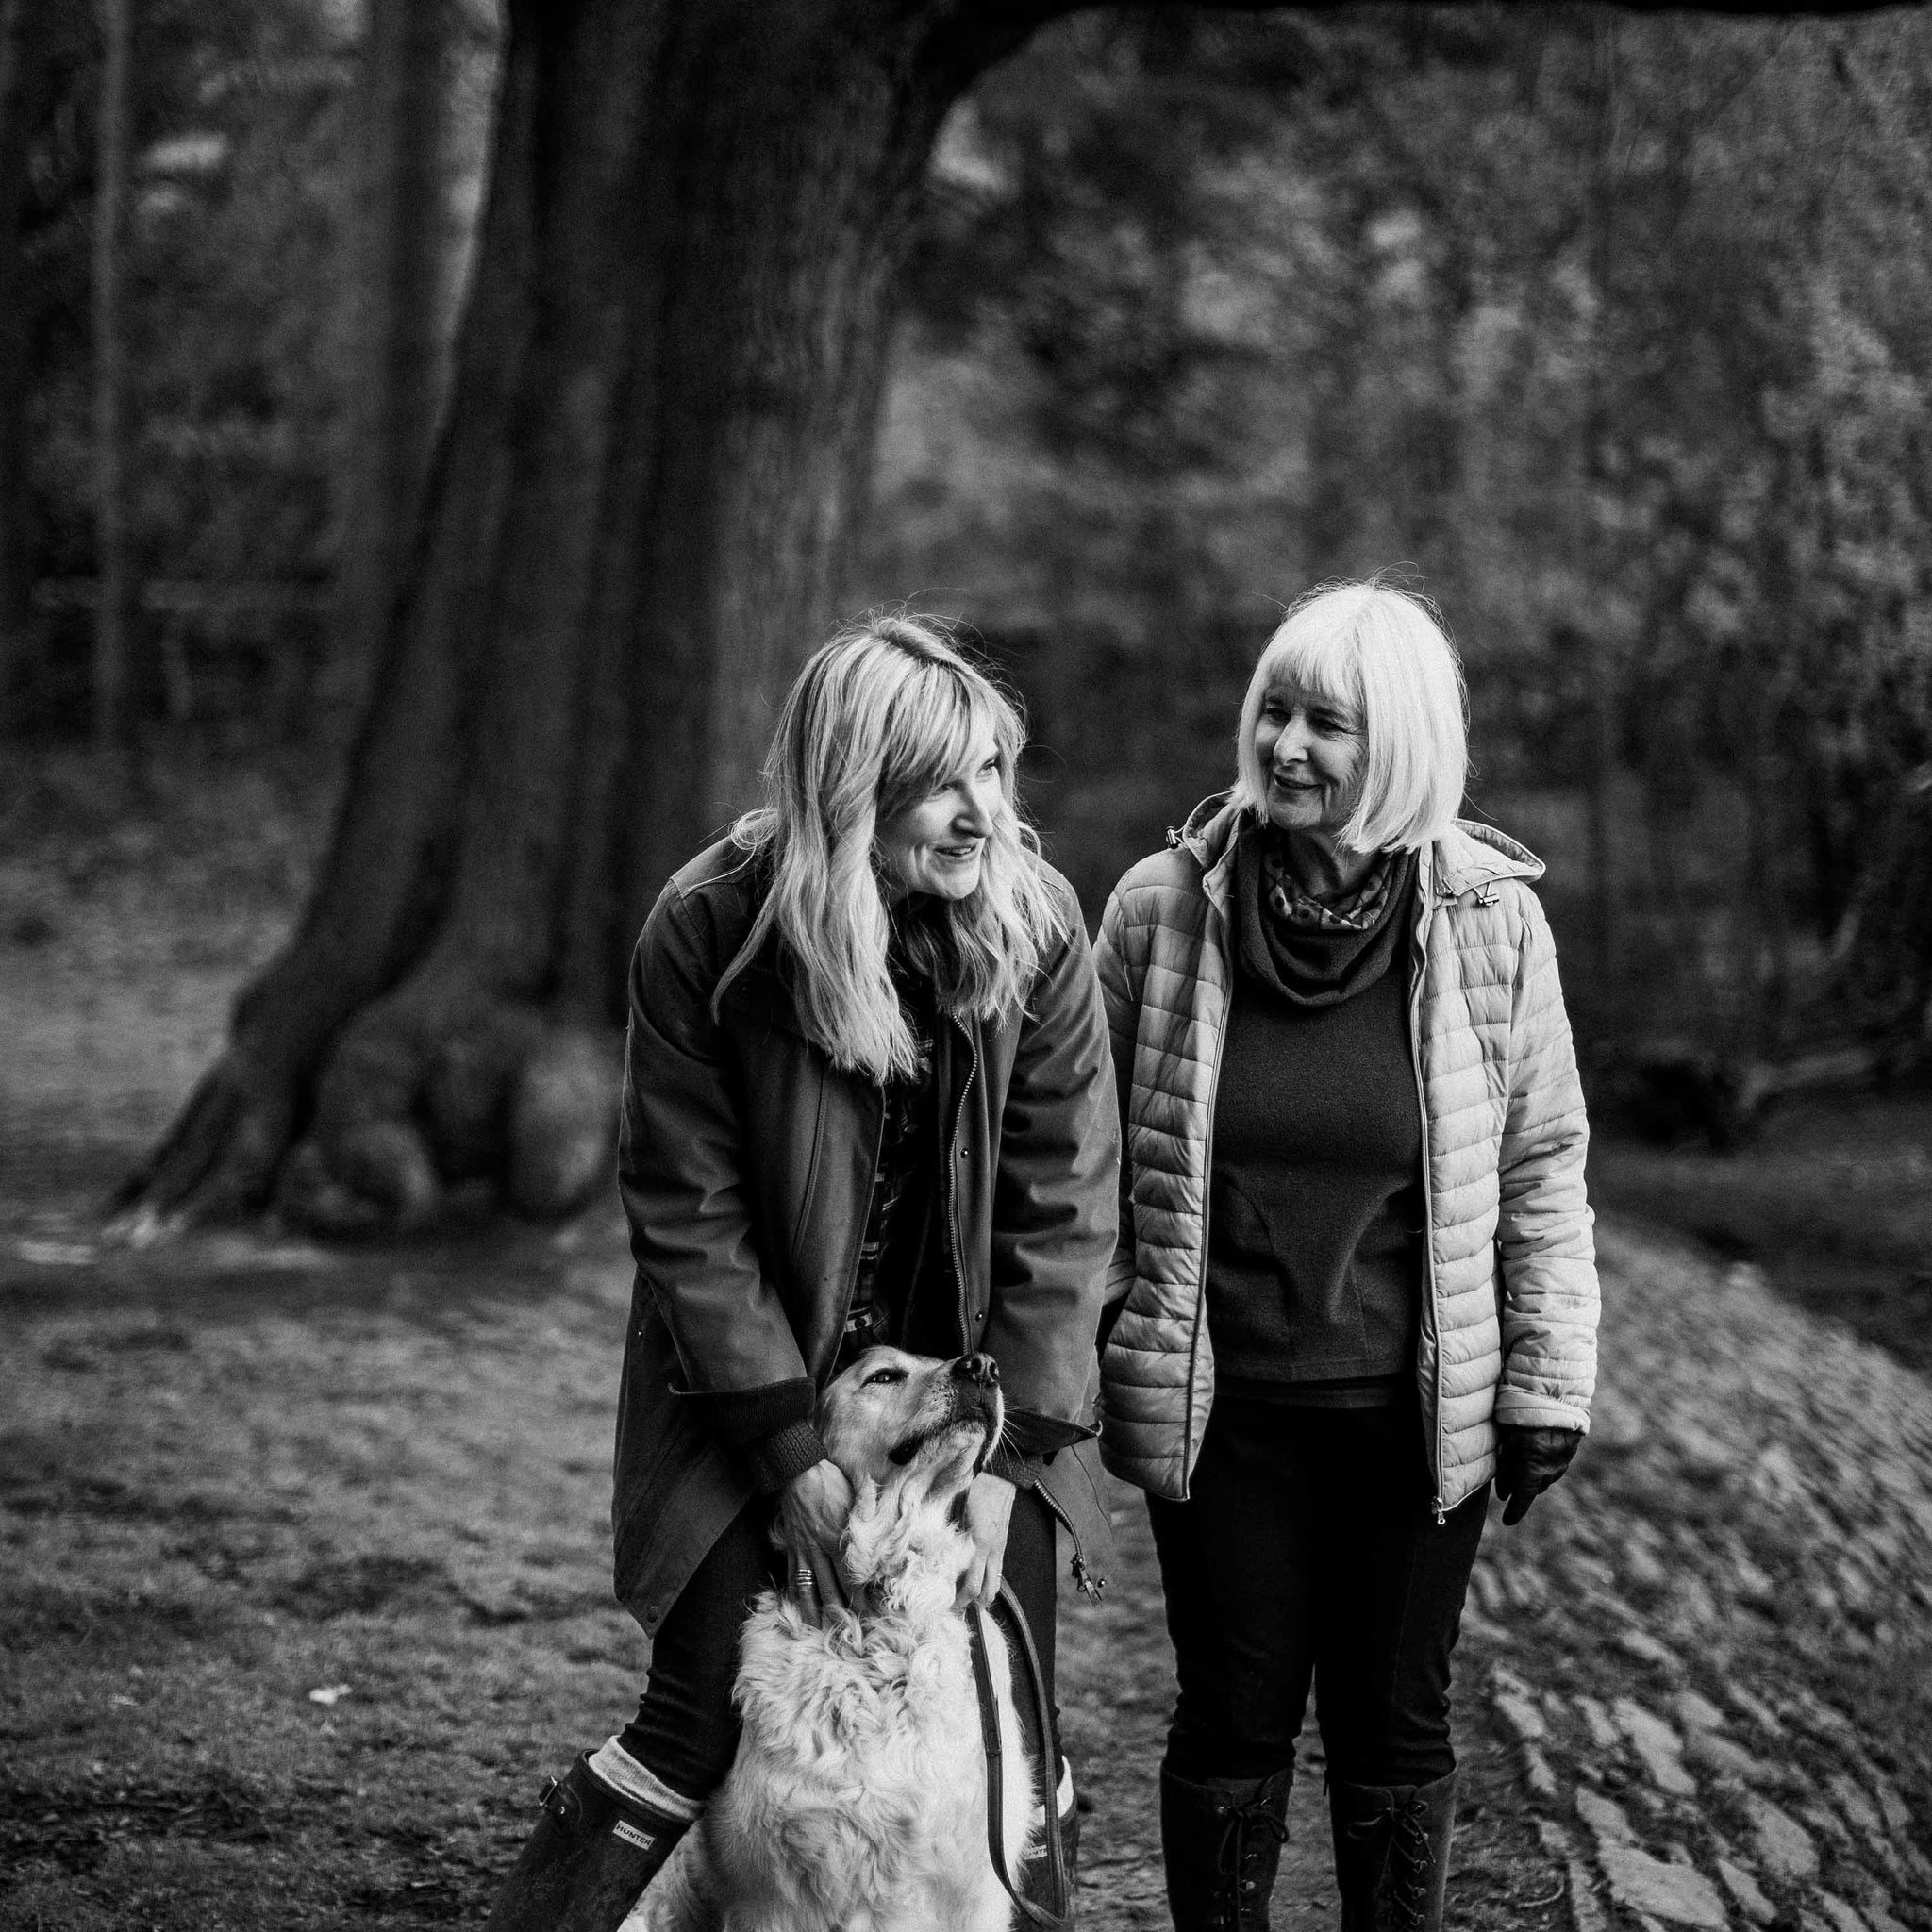 mum and daughter walking in woods with dog